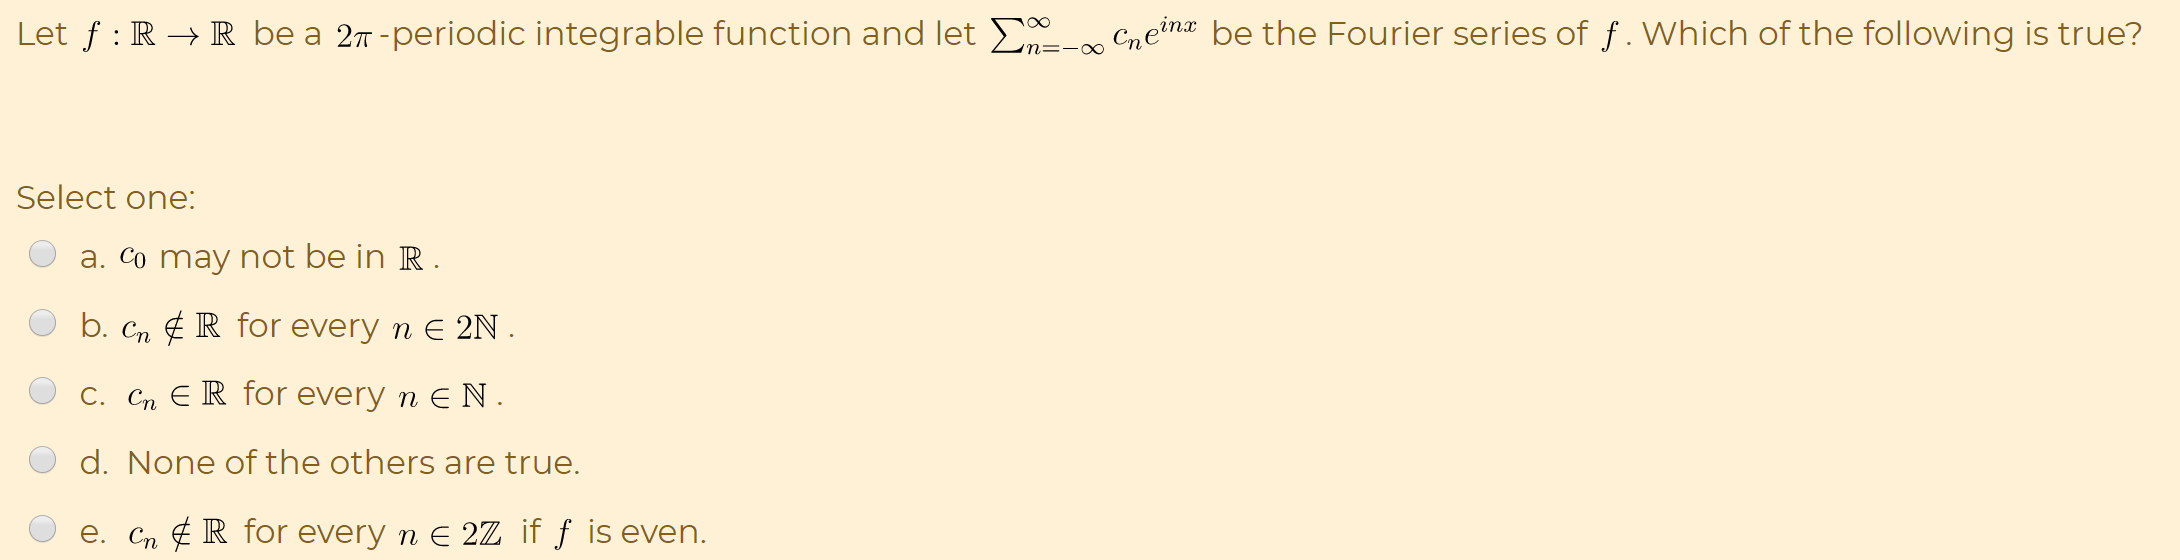 Let f : R → R be a 27 -periodic integrable function and let E-, Cneina be the Fourier series of f. Which of the following is true?
Select one:
a. Co may not be in R .
b. Cn ¢ R for every n E 2N.
C. Cn E R for every n E N.
d. None of the ot
ers are true.
e. Cn ¢ R for every n E 2Z if f is even.
